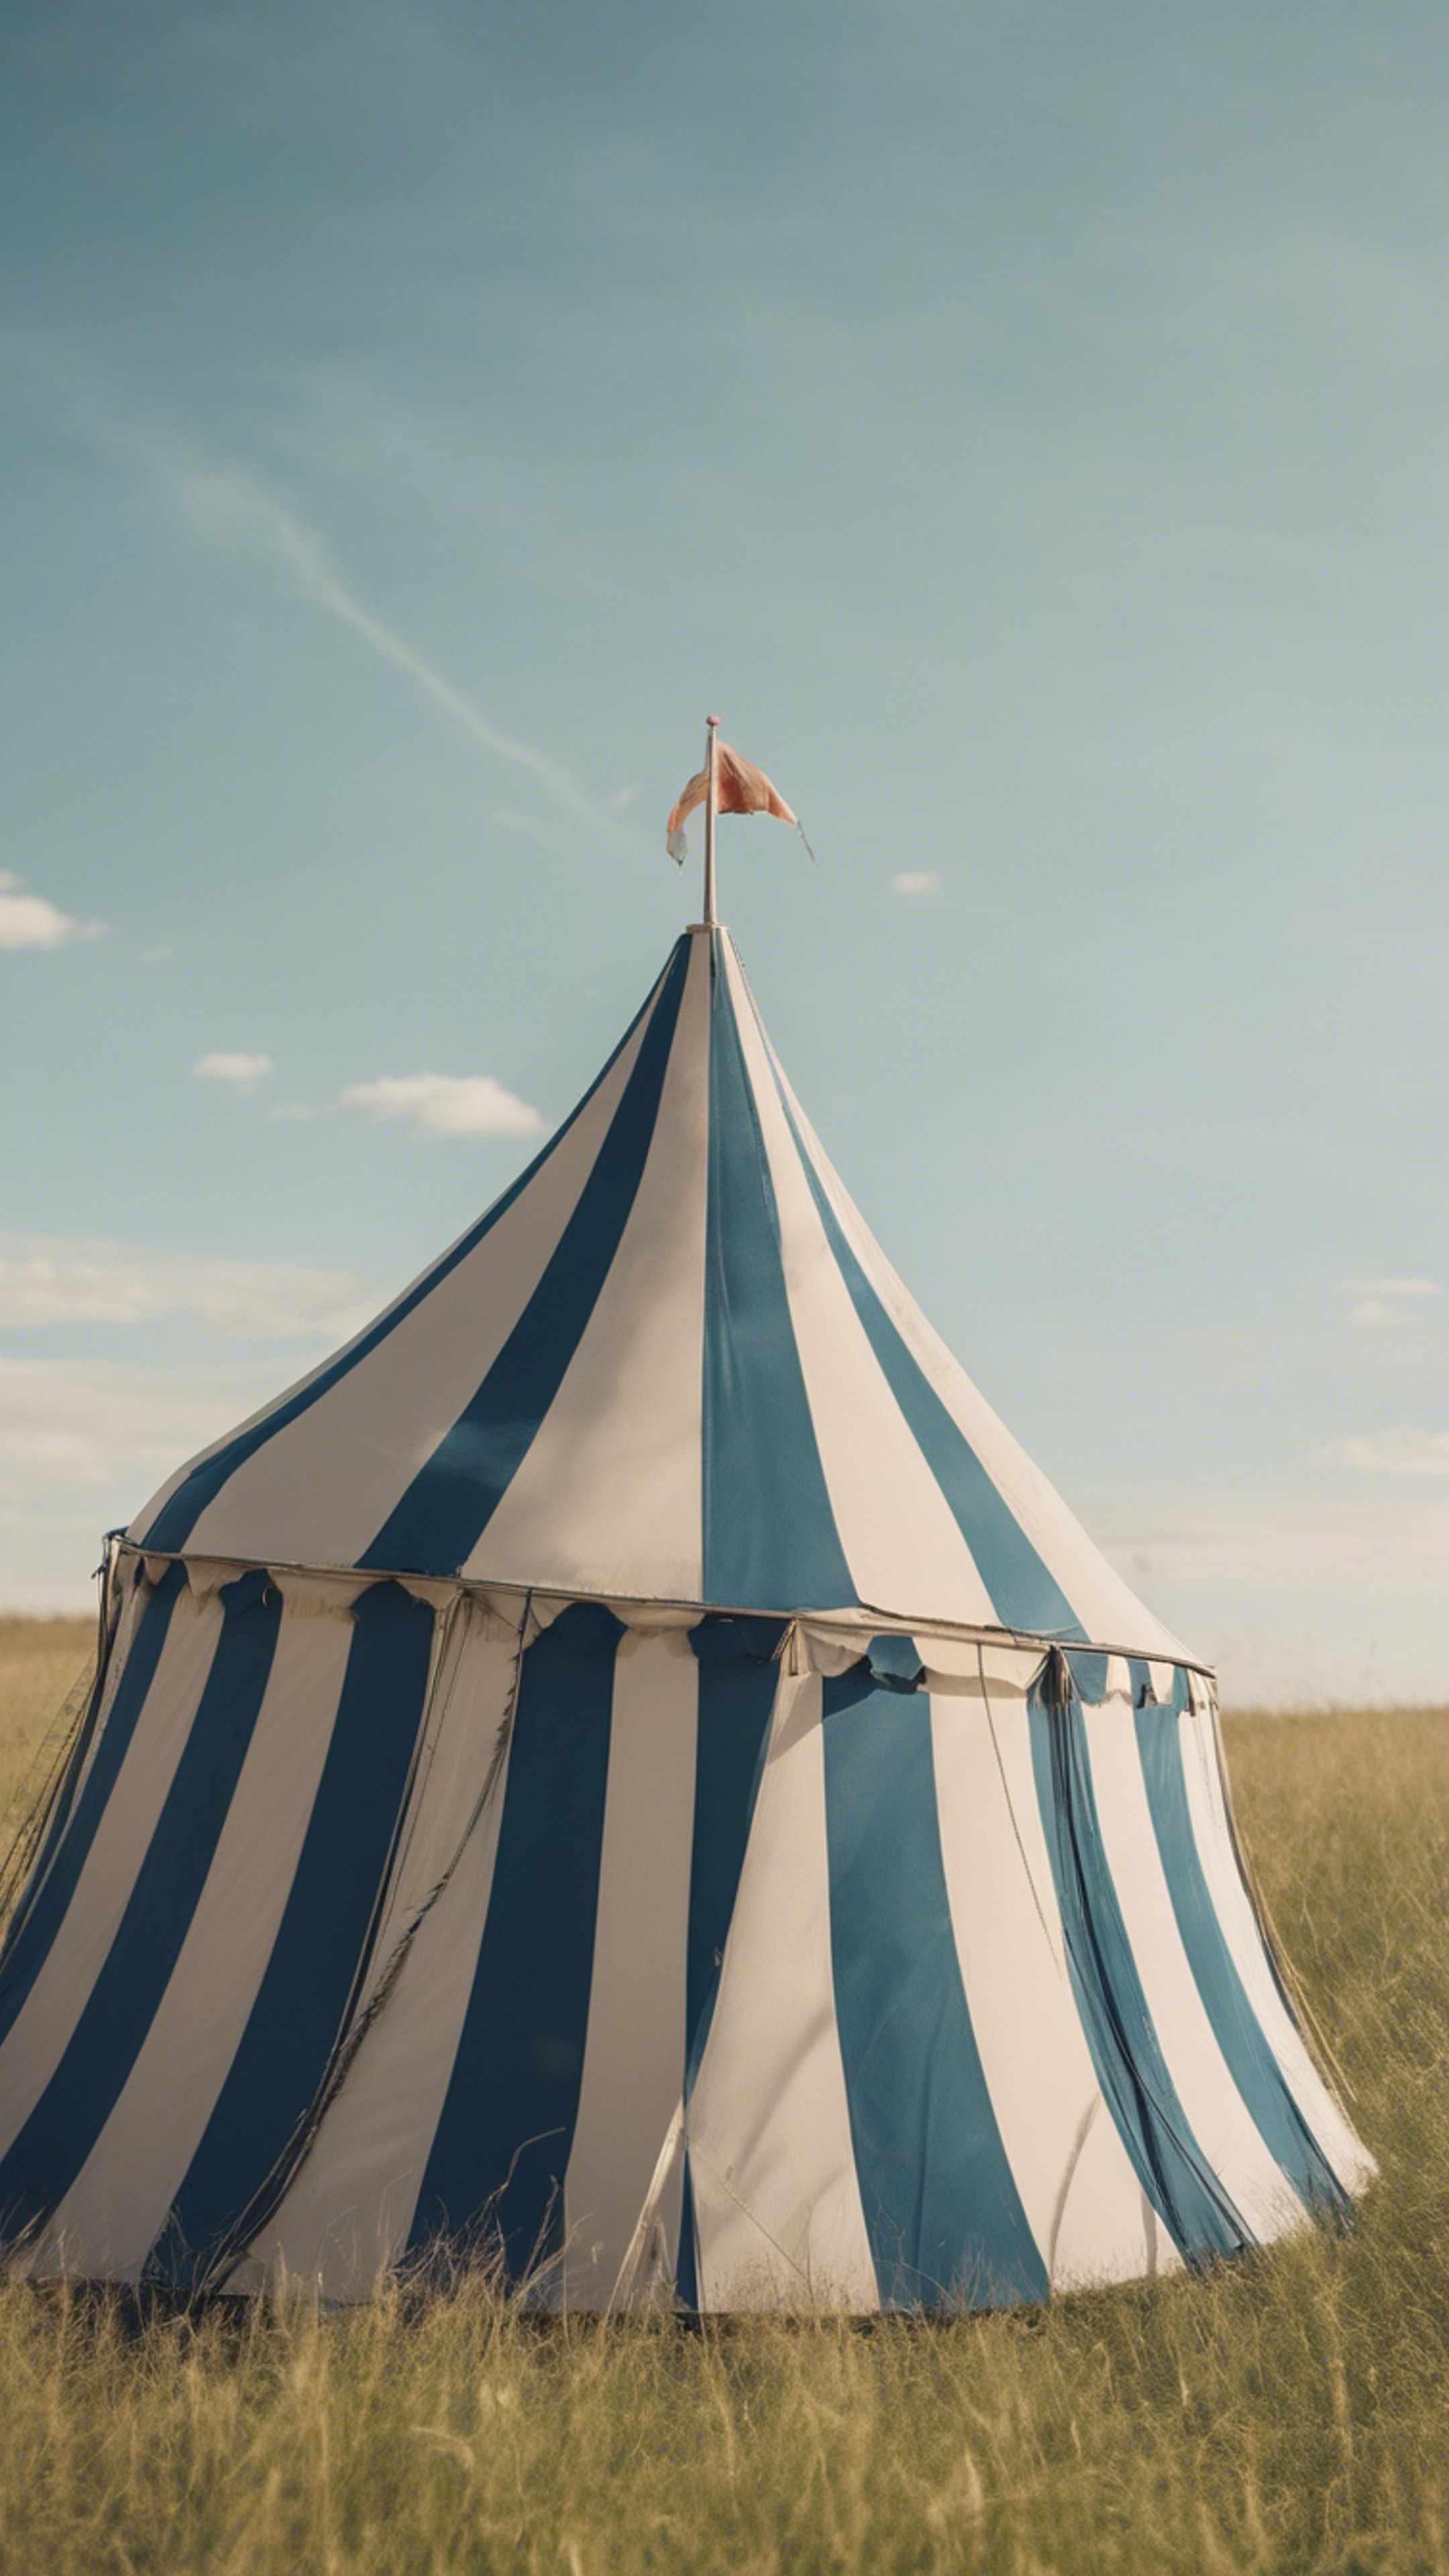 A vintage striped circus tent in a grassy field with a blue sky overhead. 벽지[07d58b74cbfe41aa8350]